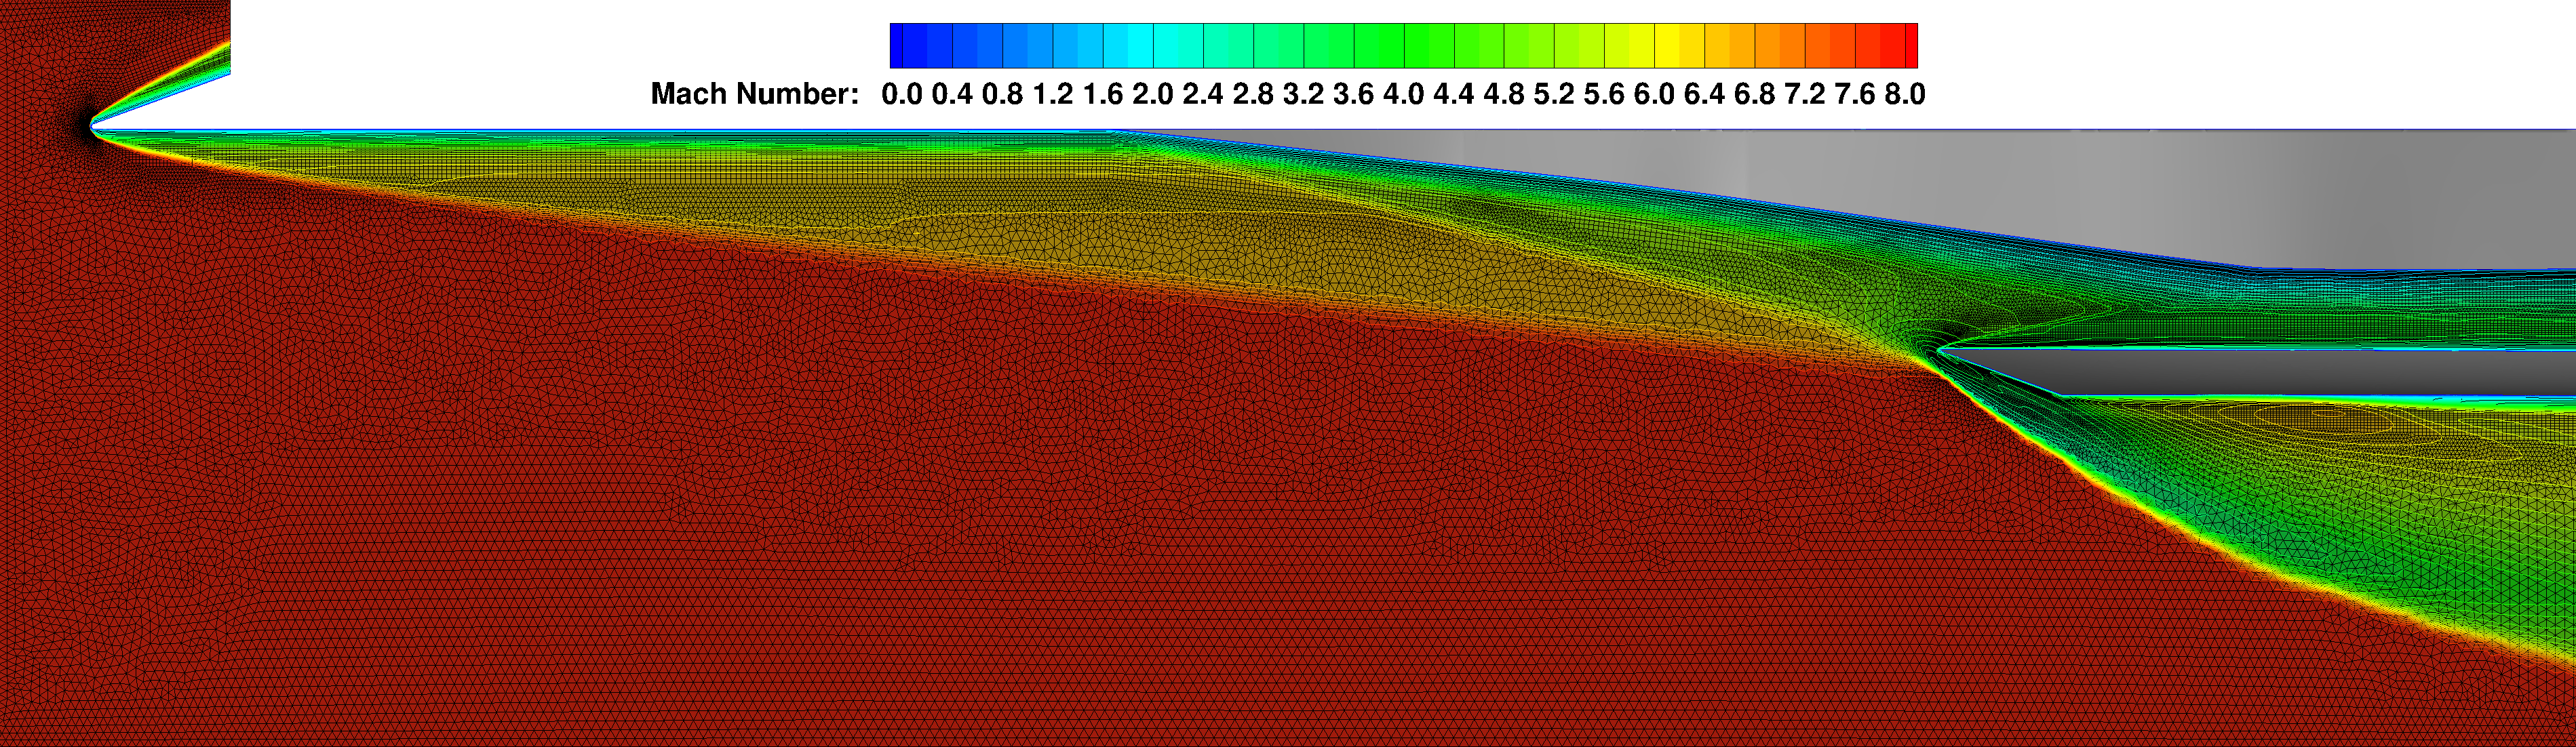 Mach number image from a HIFiRE 7 tare simulation